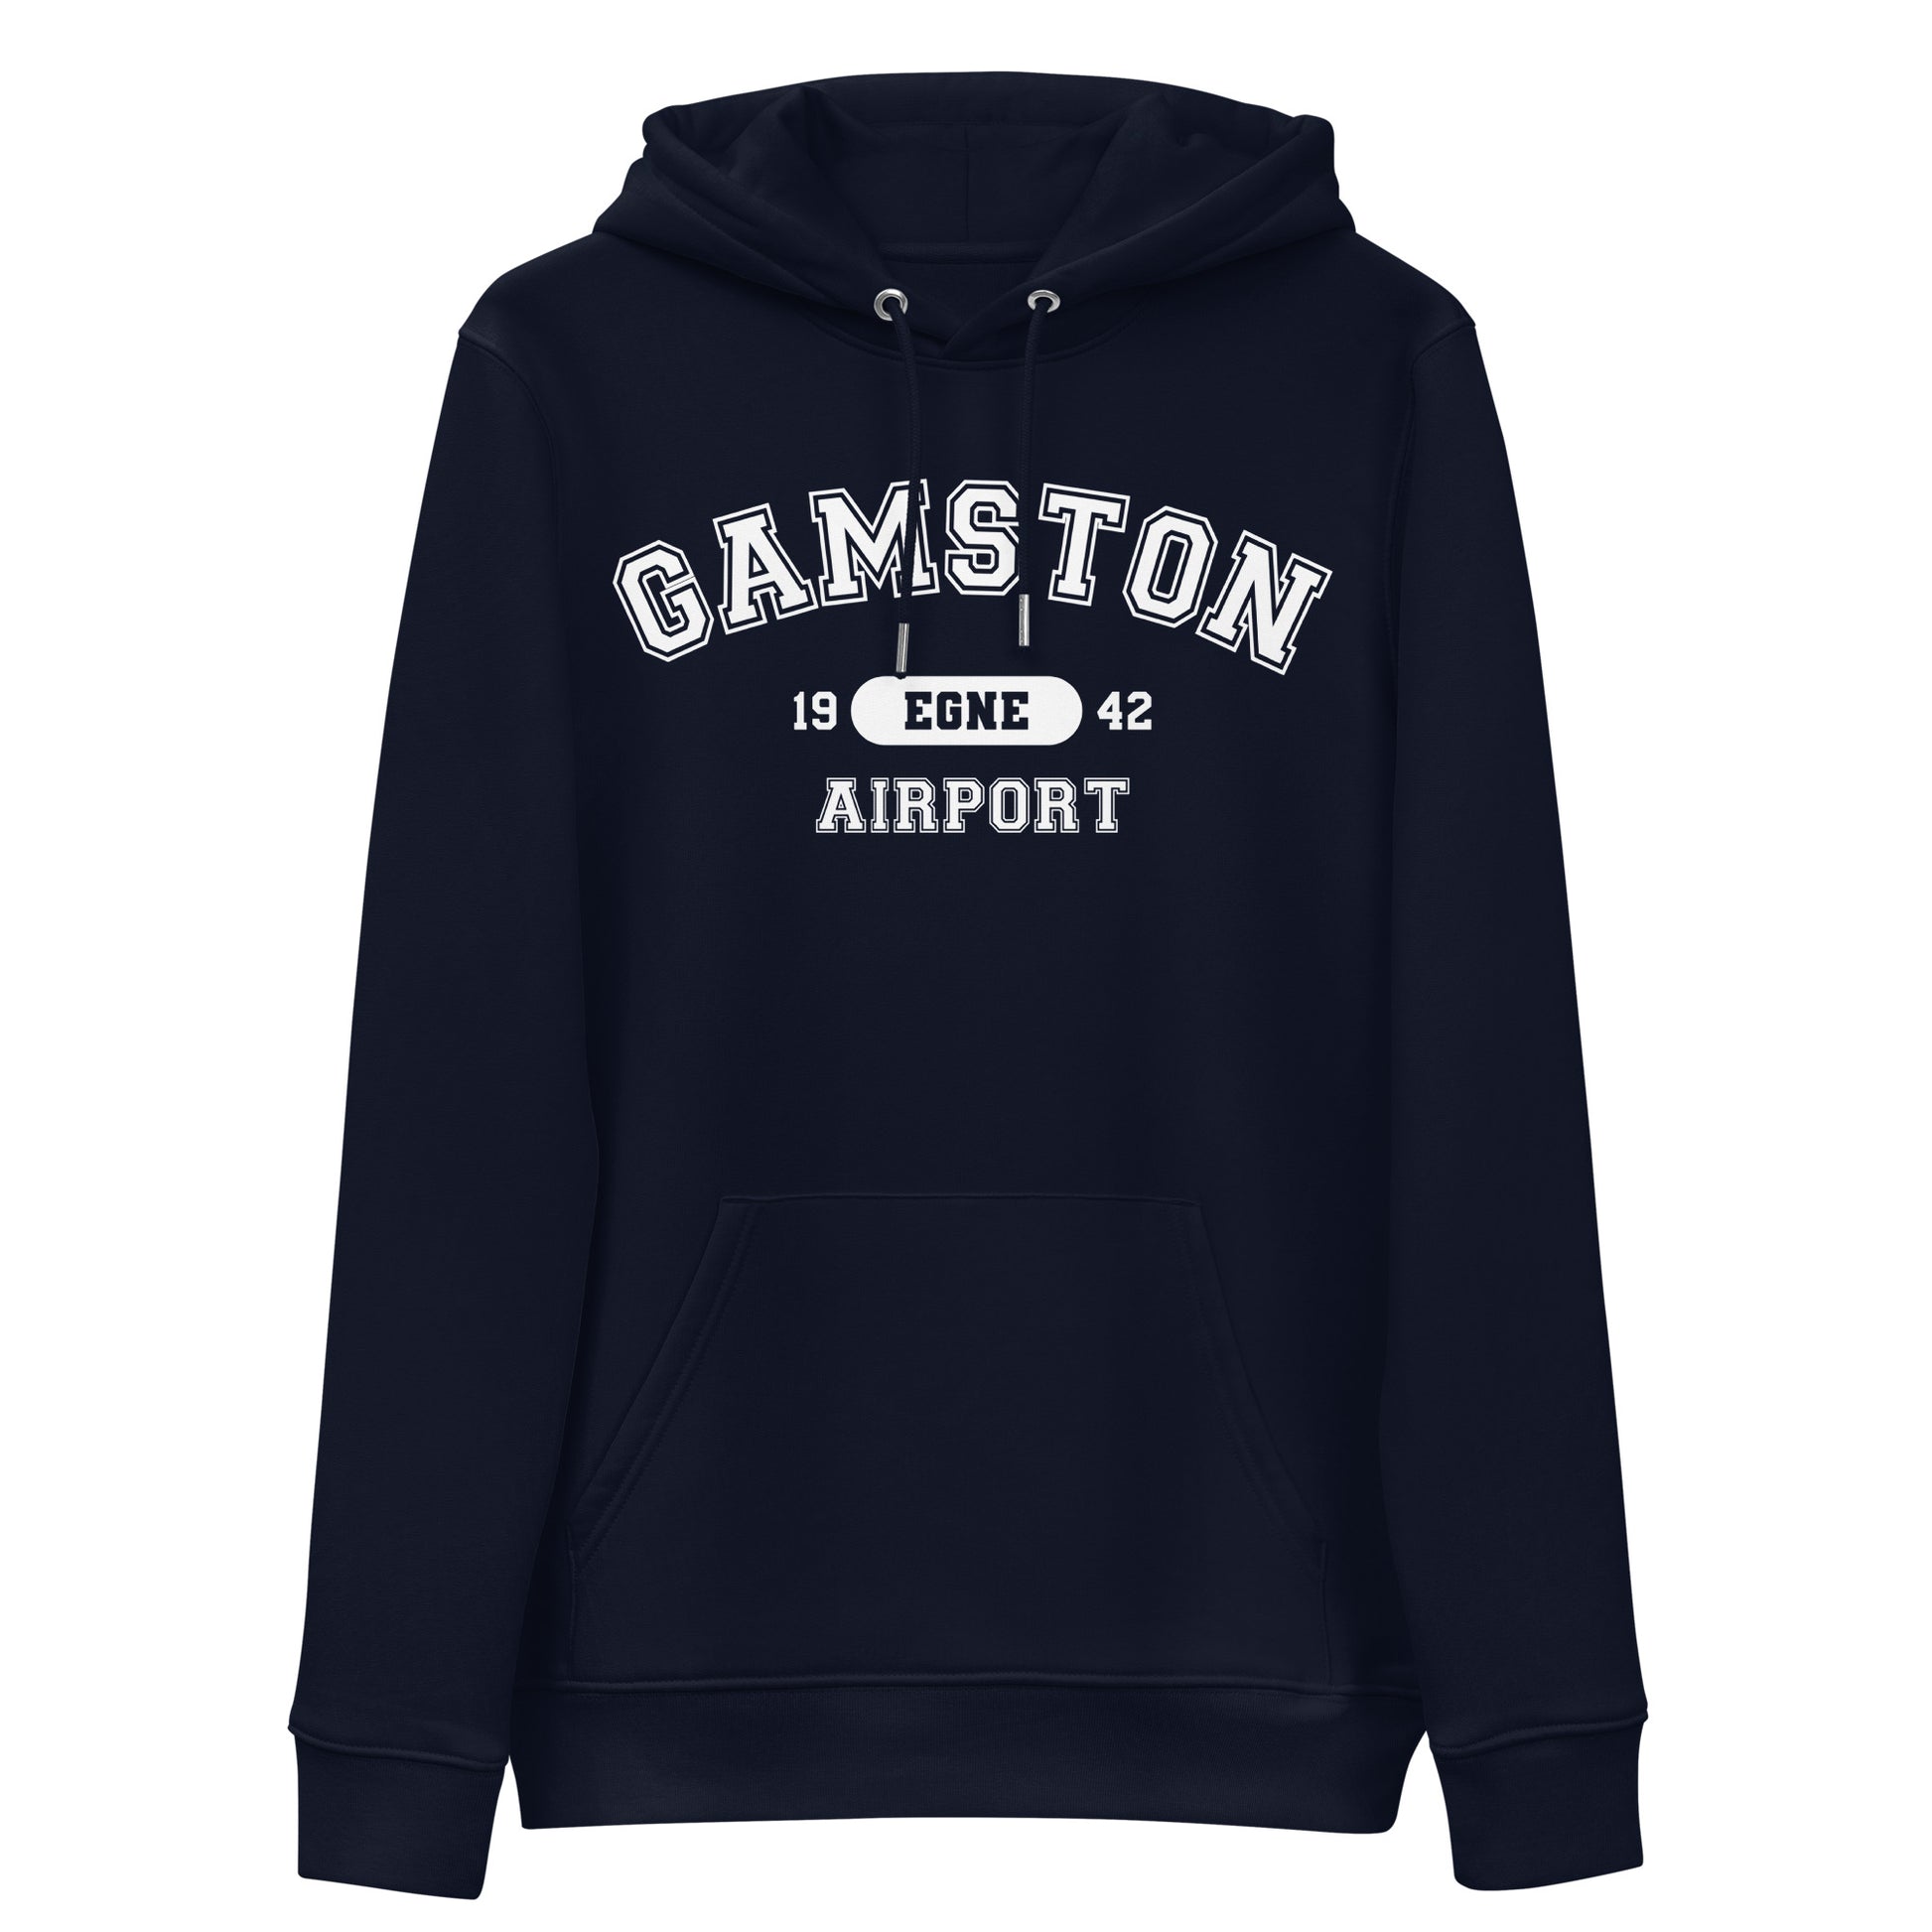 Navy blue Gamston Airport collegiate heavyweight hoodie features a classic collegiate style print with the airport's name, ICAO code and date of construction on the front.